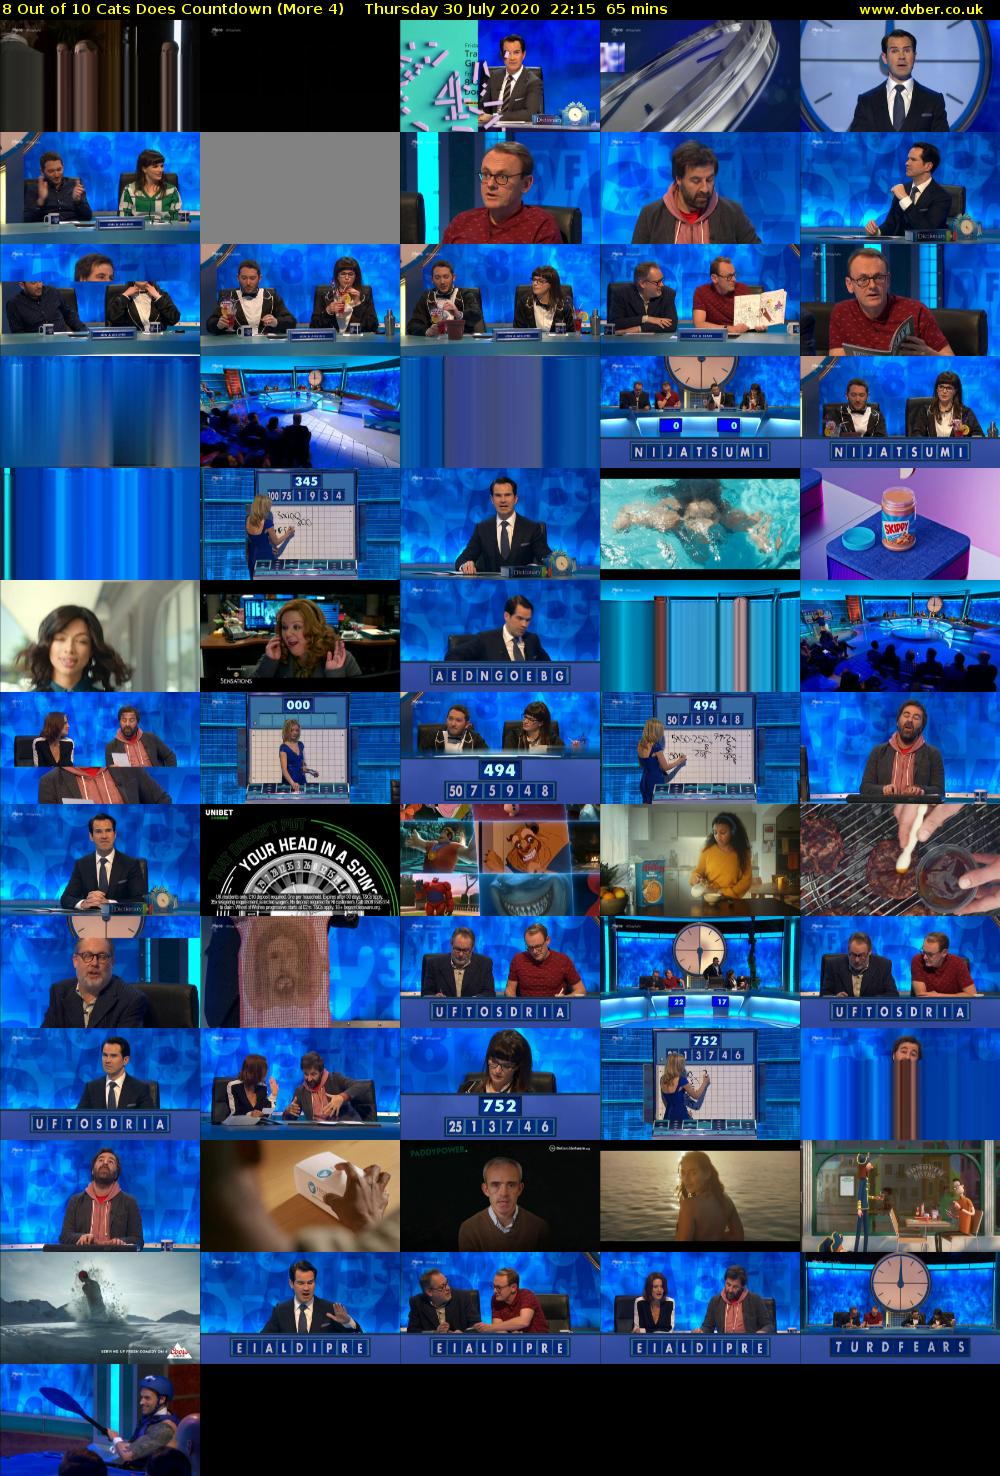 8 Out of 10 Cats Does Countdown (More 4) Thursday 30 July 2020 22:15 - 23:20